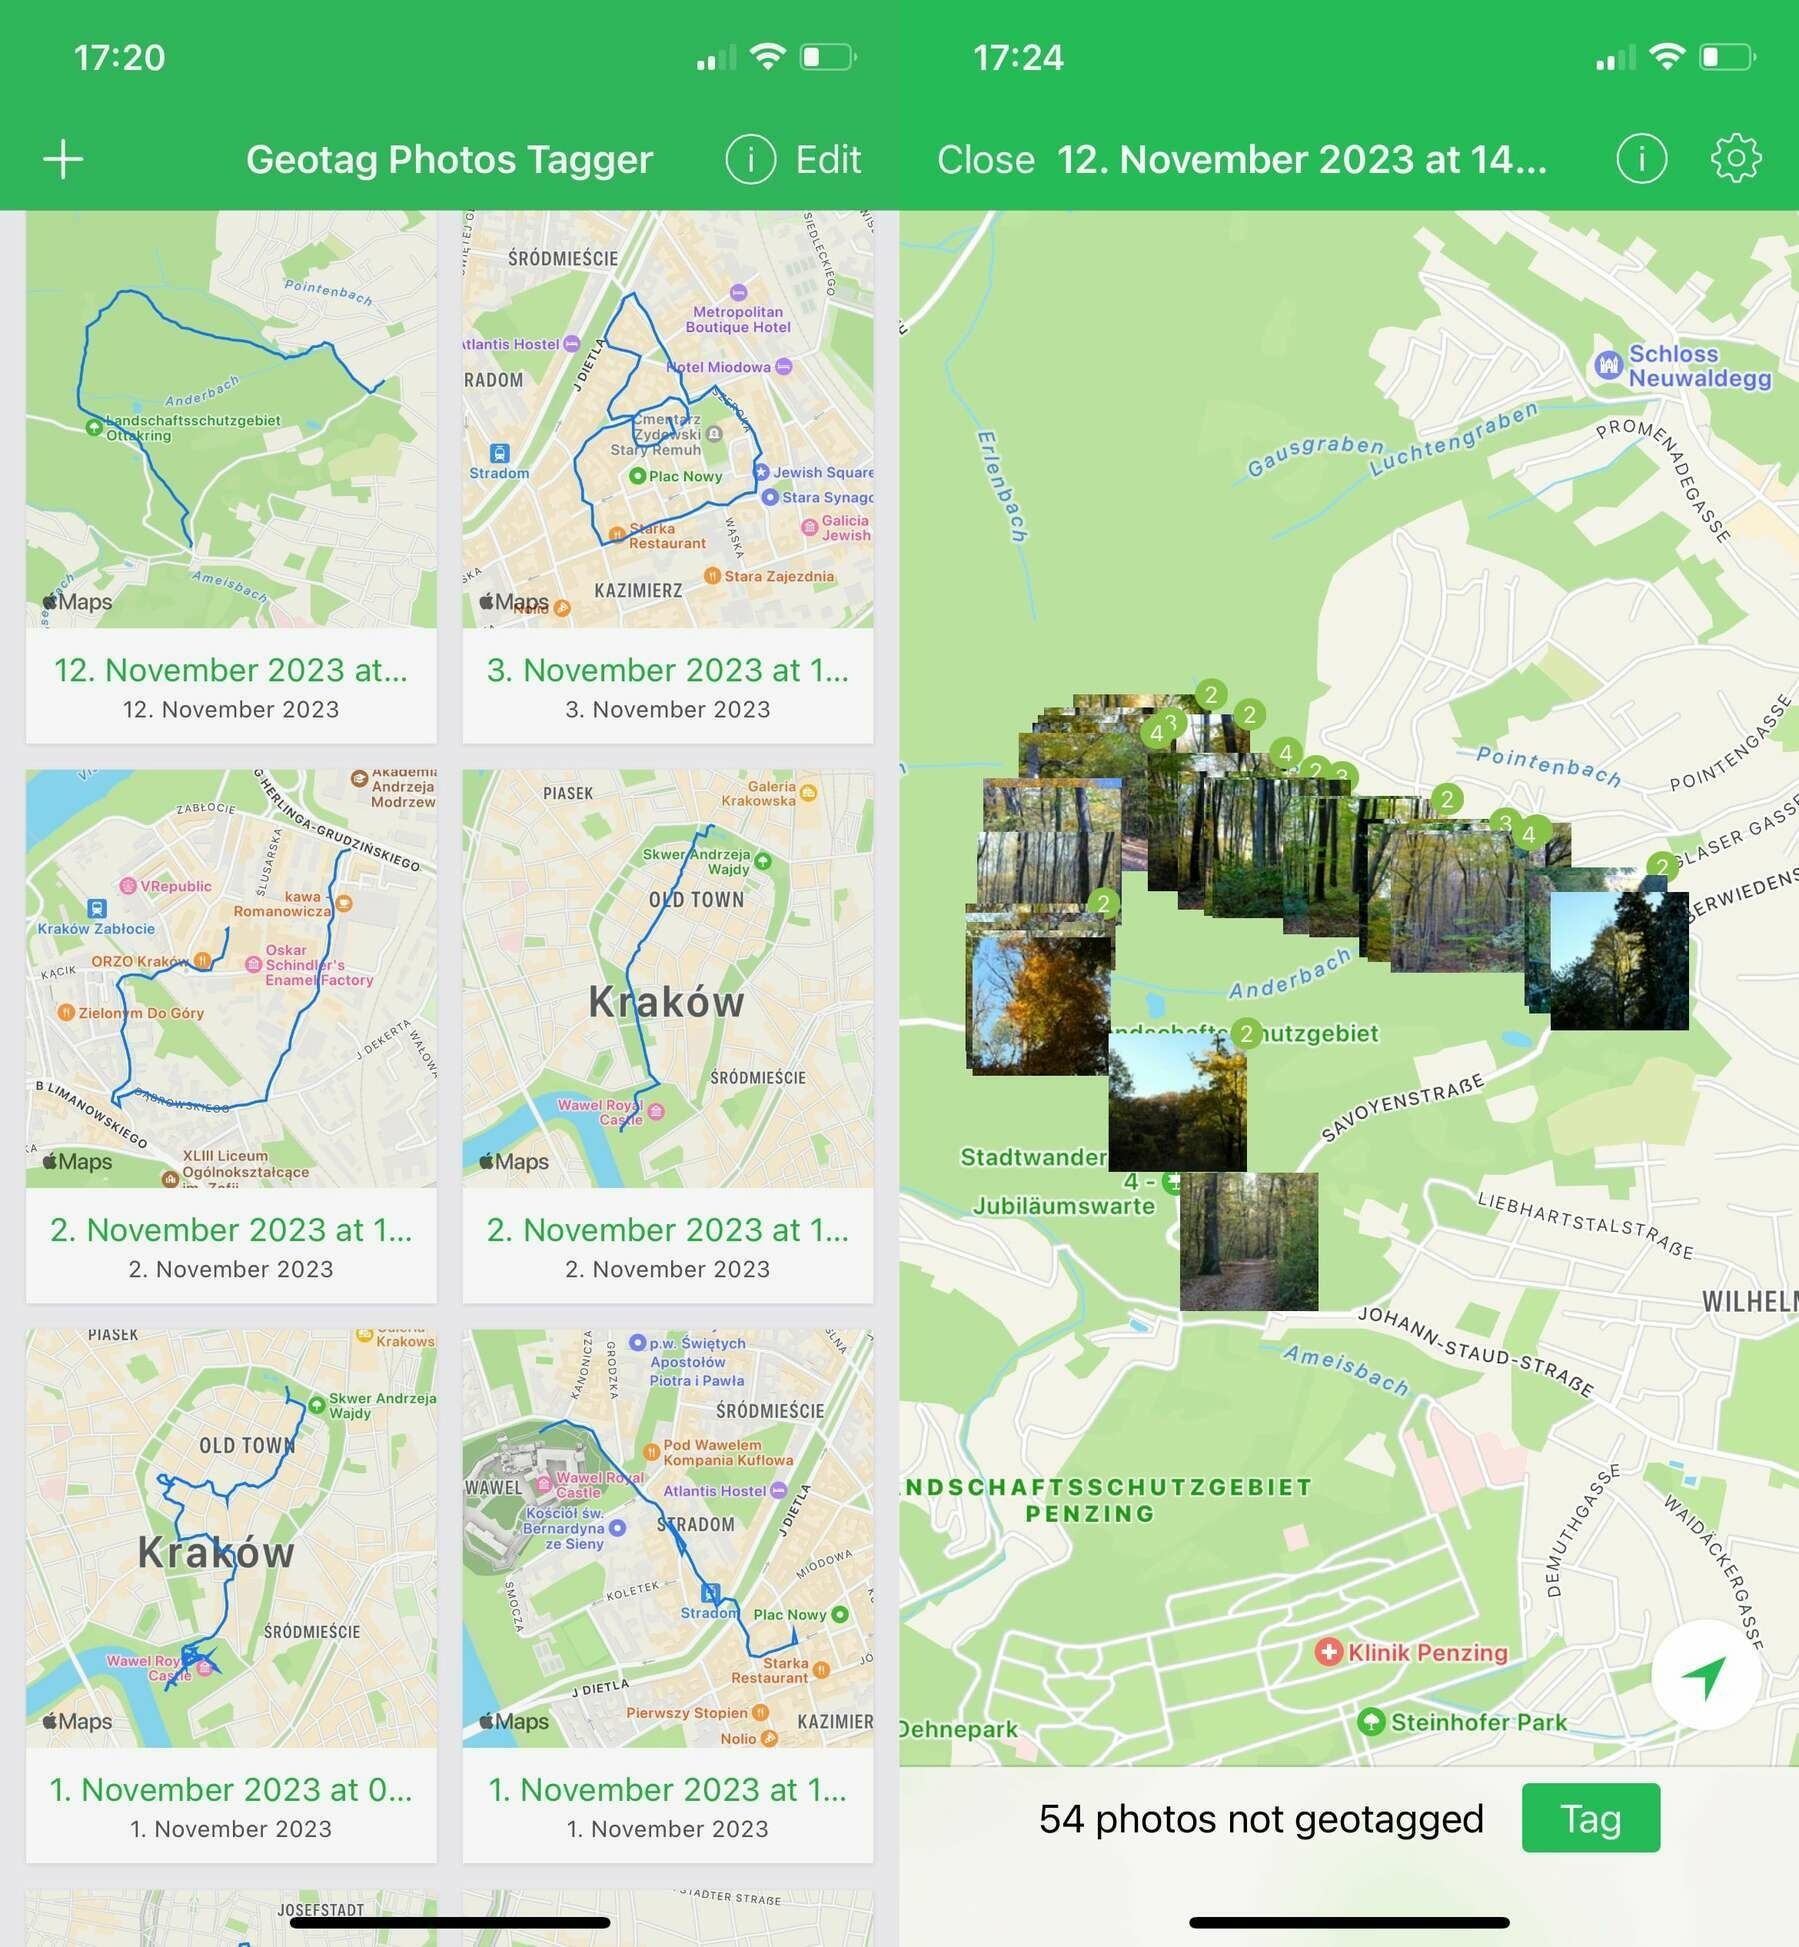 Left side shows a screenshot of Geotag Photos Tagger app which shows a grid of tiles, each tile shows a map of the route and name and date; the right side shows the details of the route with the mapped photos overlayed the route and at the bottom it says 54 photos not geotagged and a green Tag button